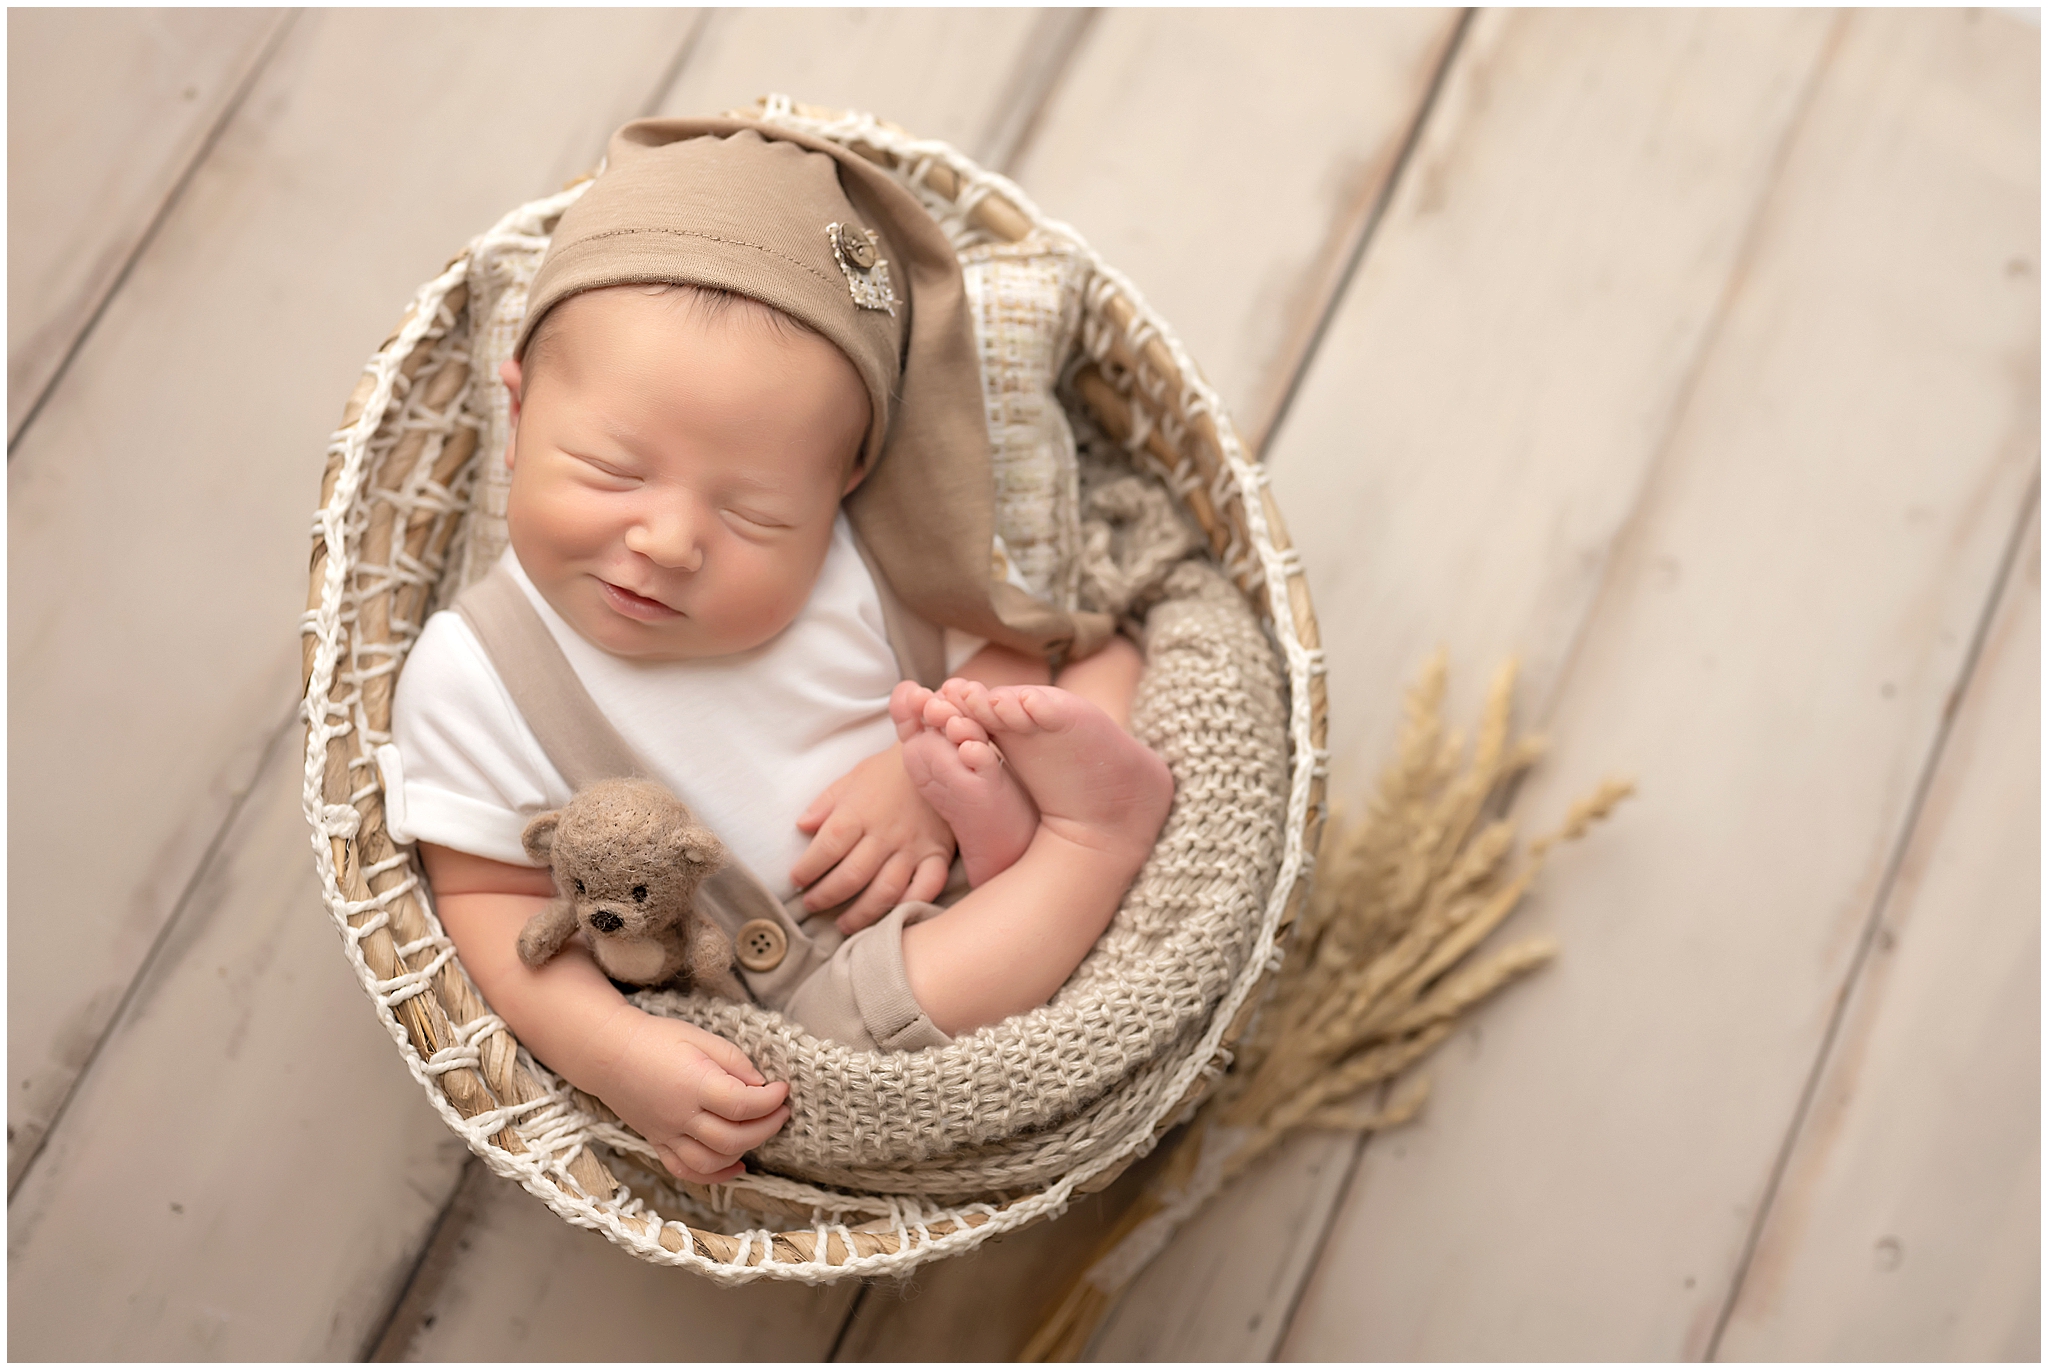 baby boy curled up in basket holding teddy bear during newborn session at studio in london, ontario